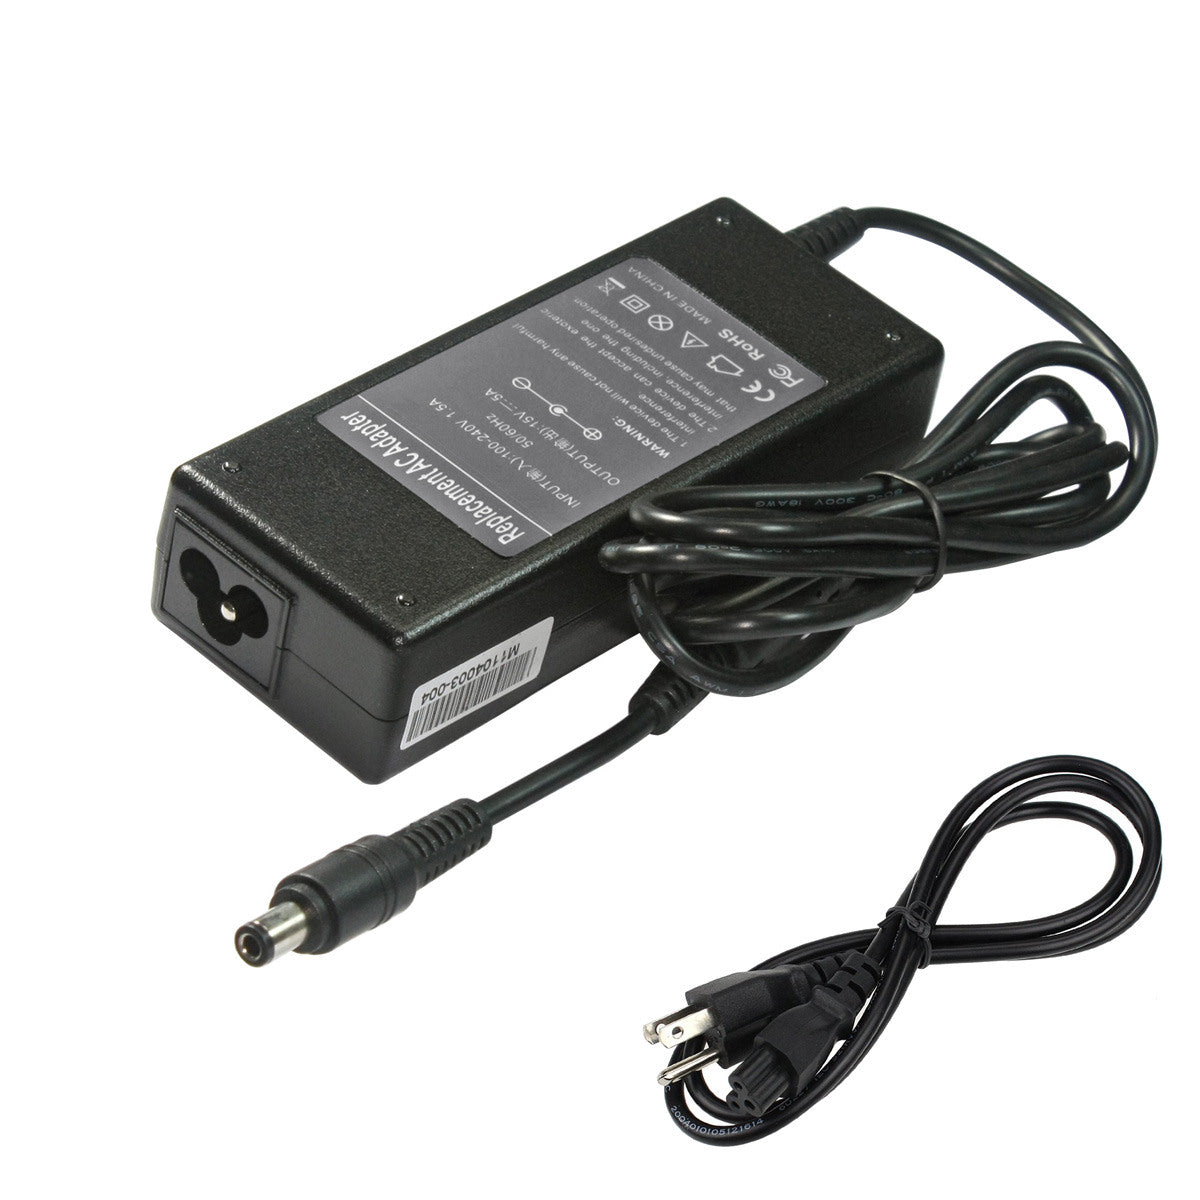 Compatible Designed Toshiba Satellite A55 AC Adapter.